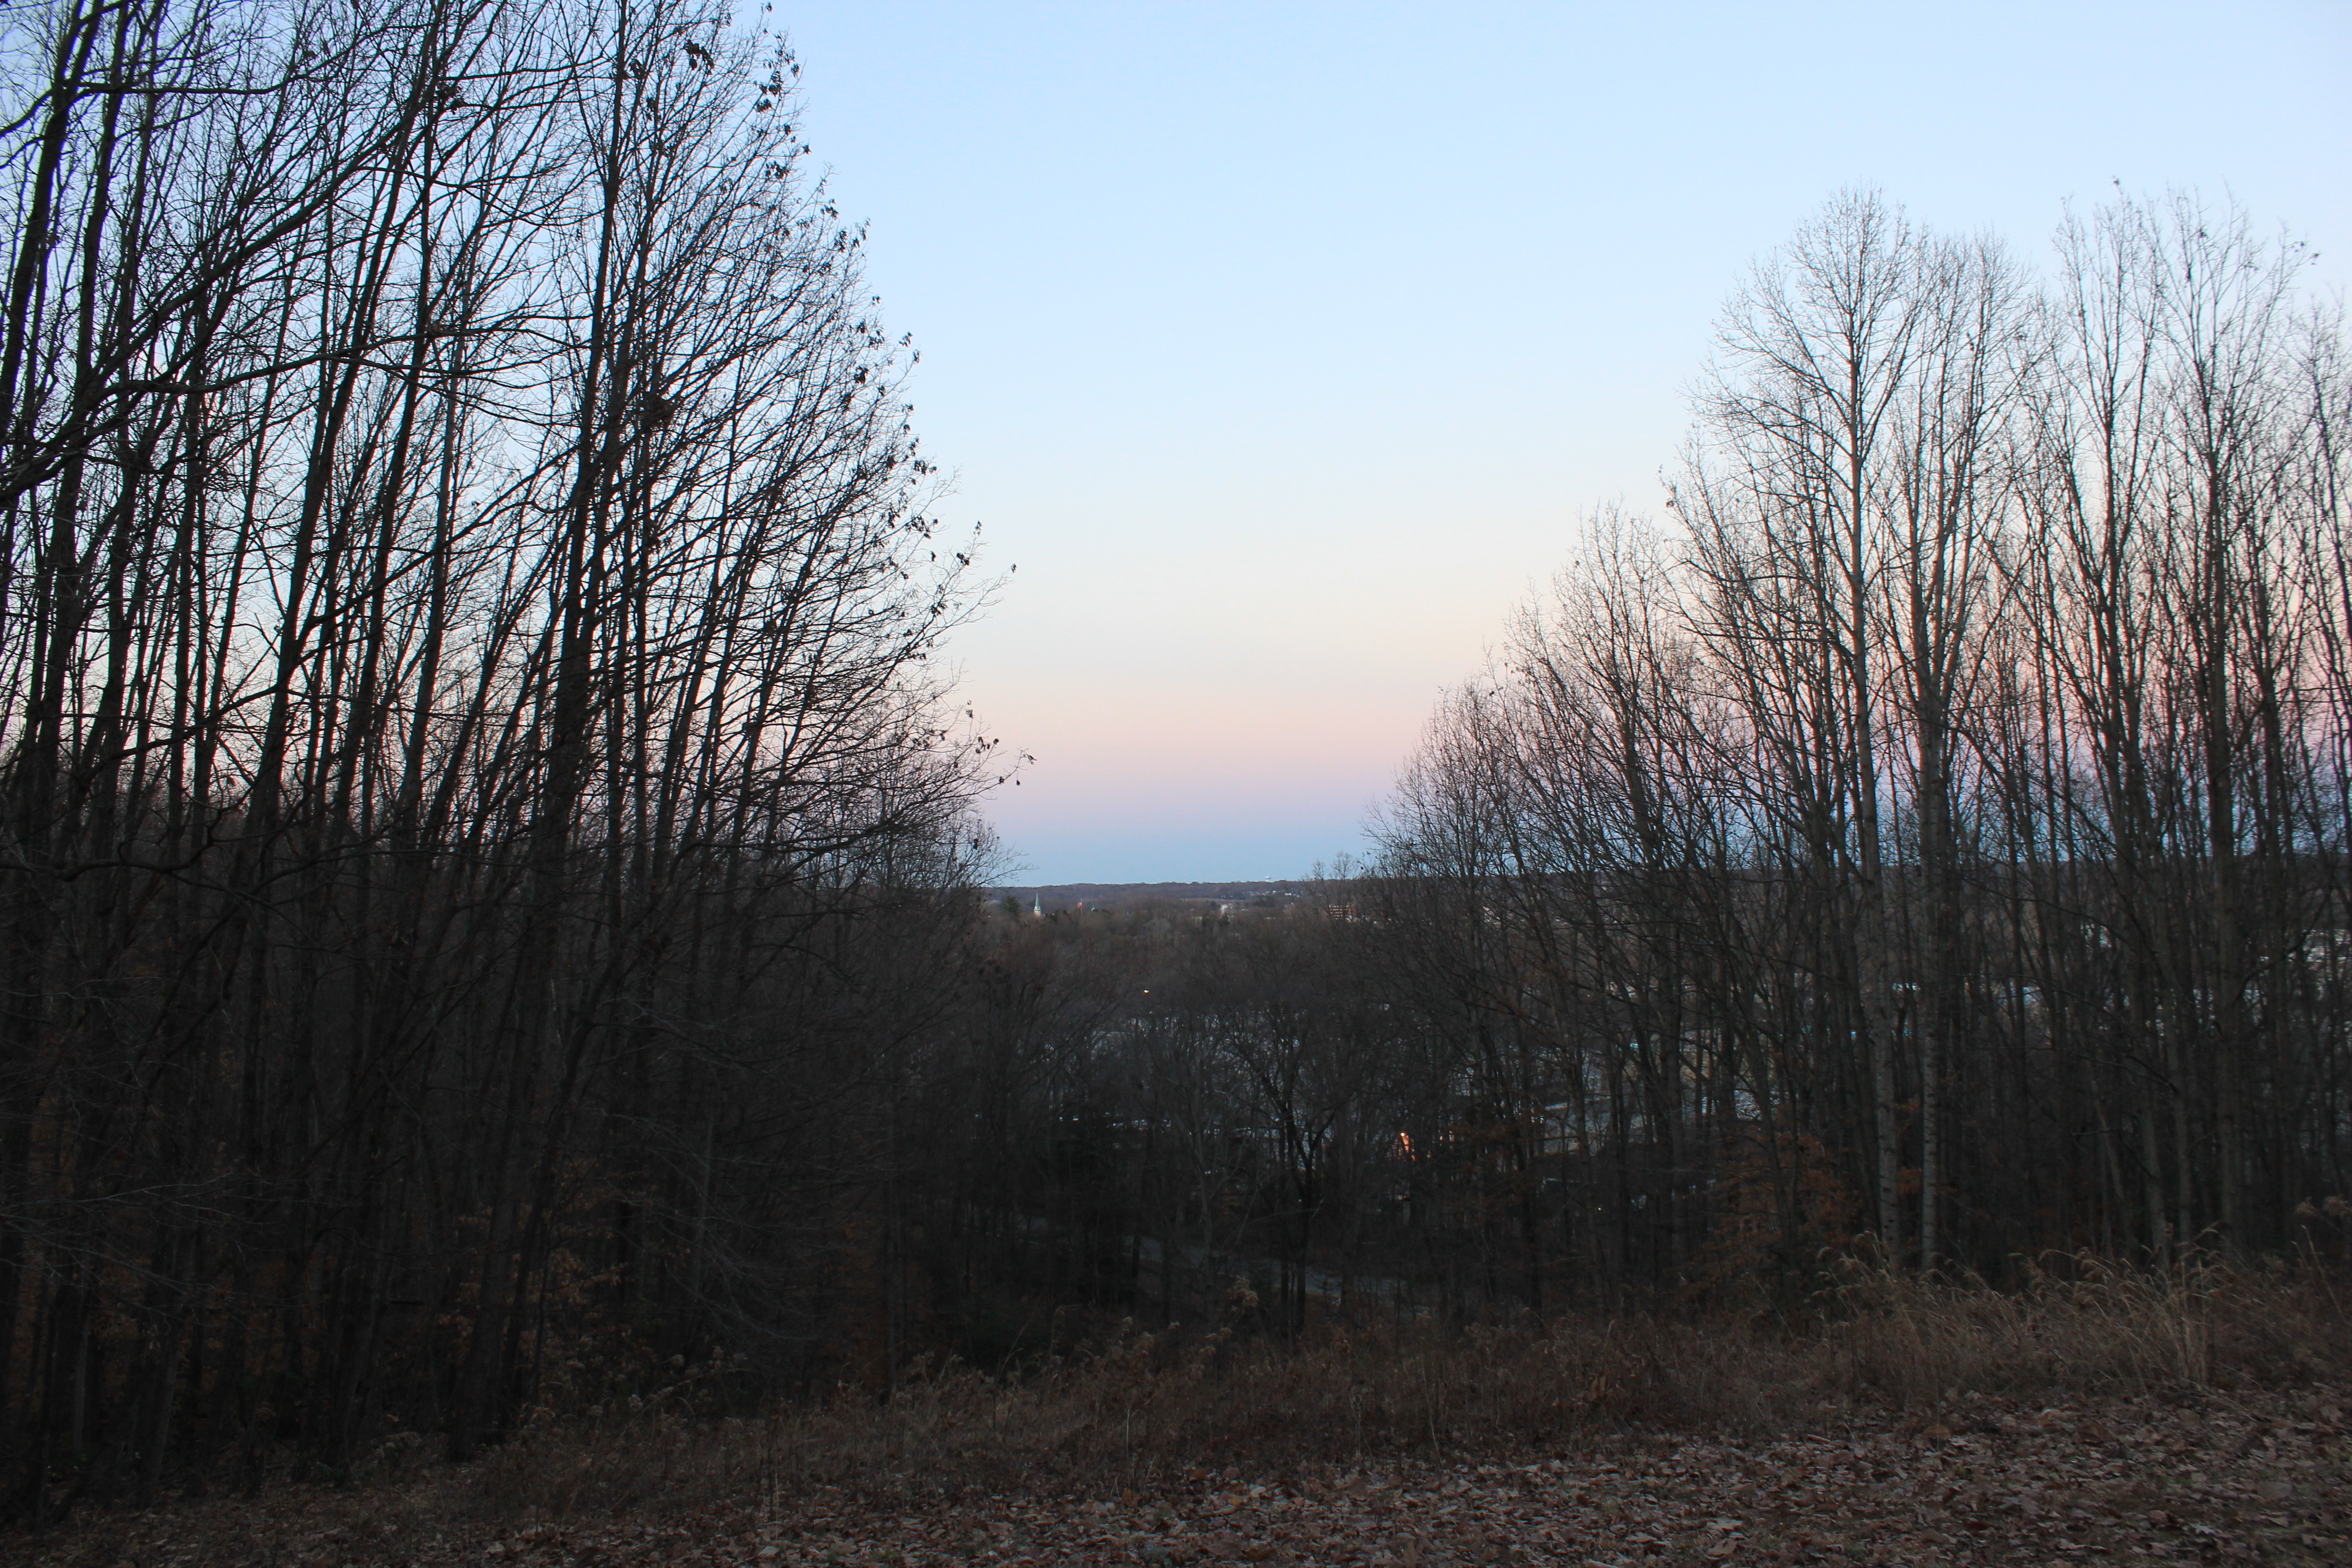 View through bare trees to a town lit up in early dusk.